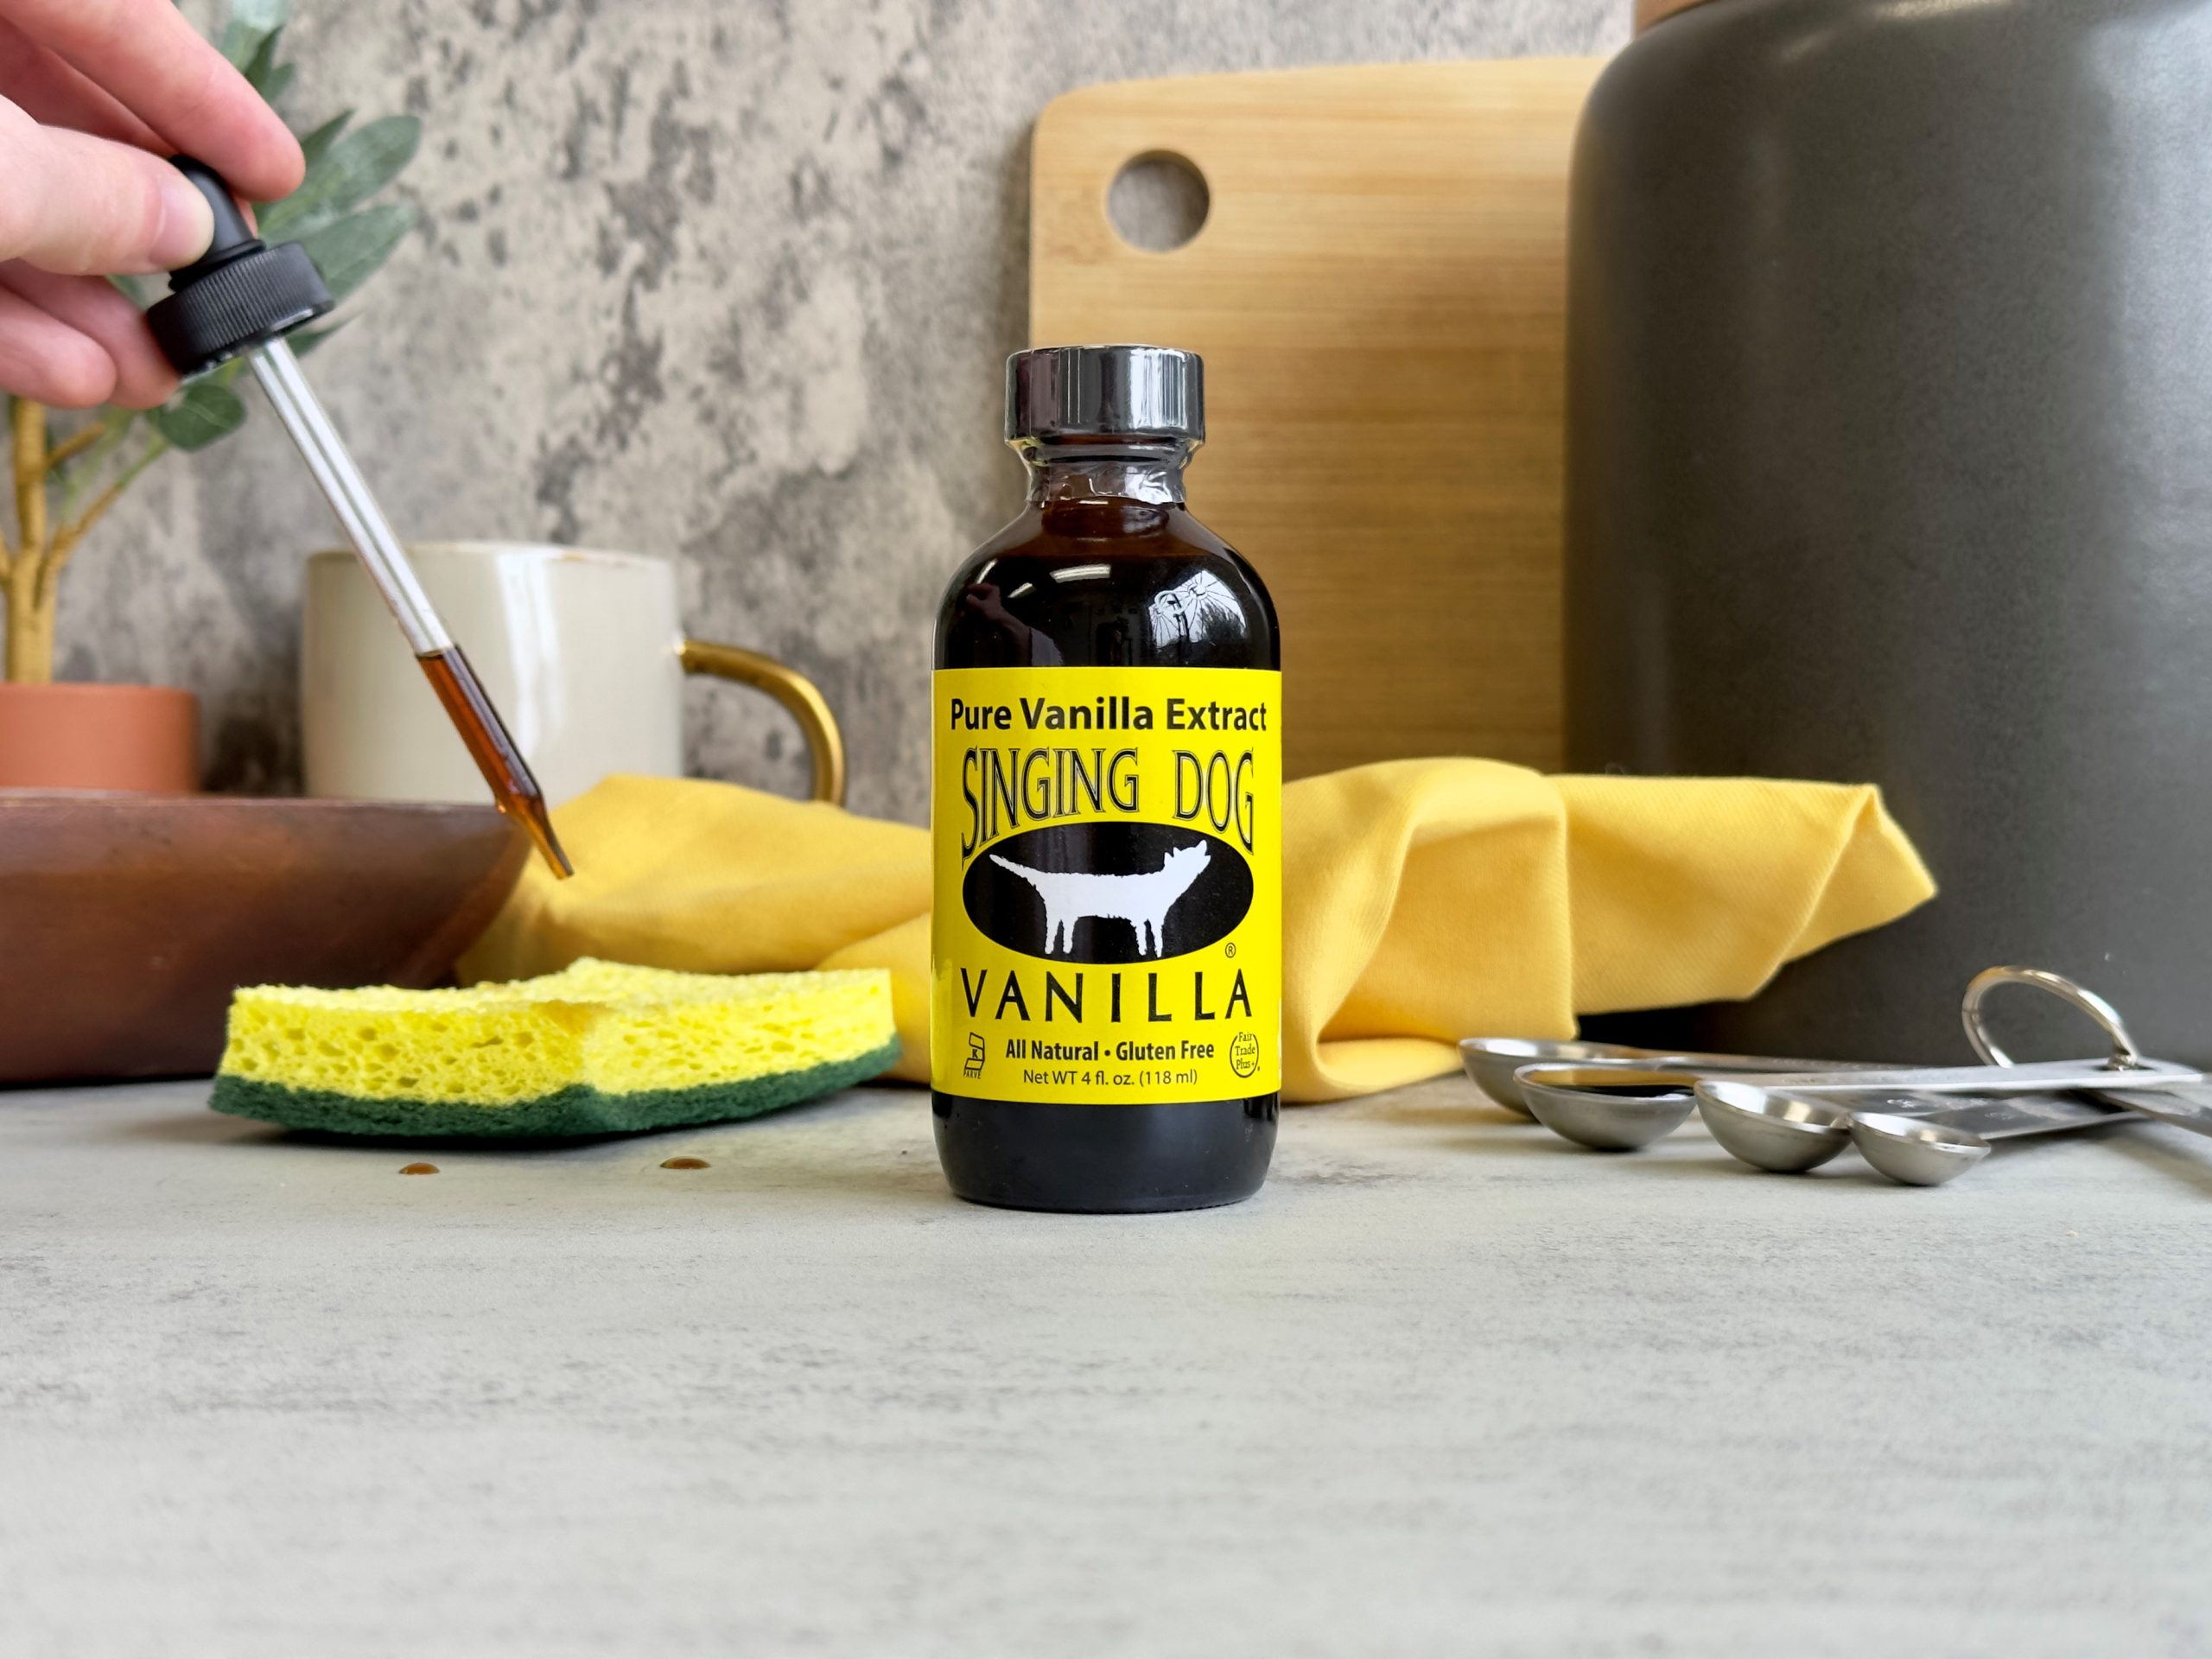 Surface cleaner made for Cleaning with Vanilla Extract